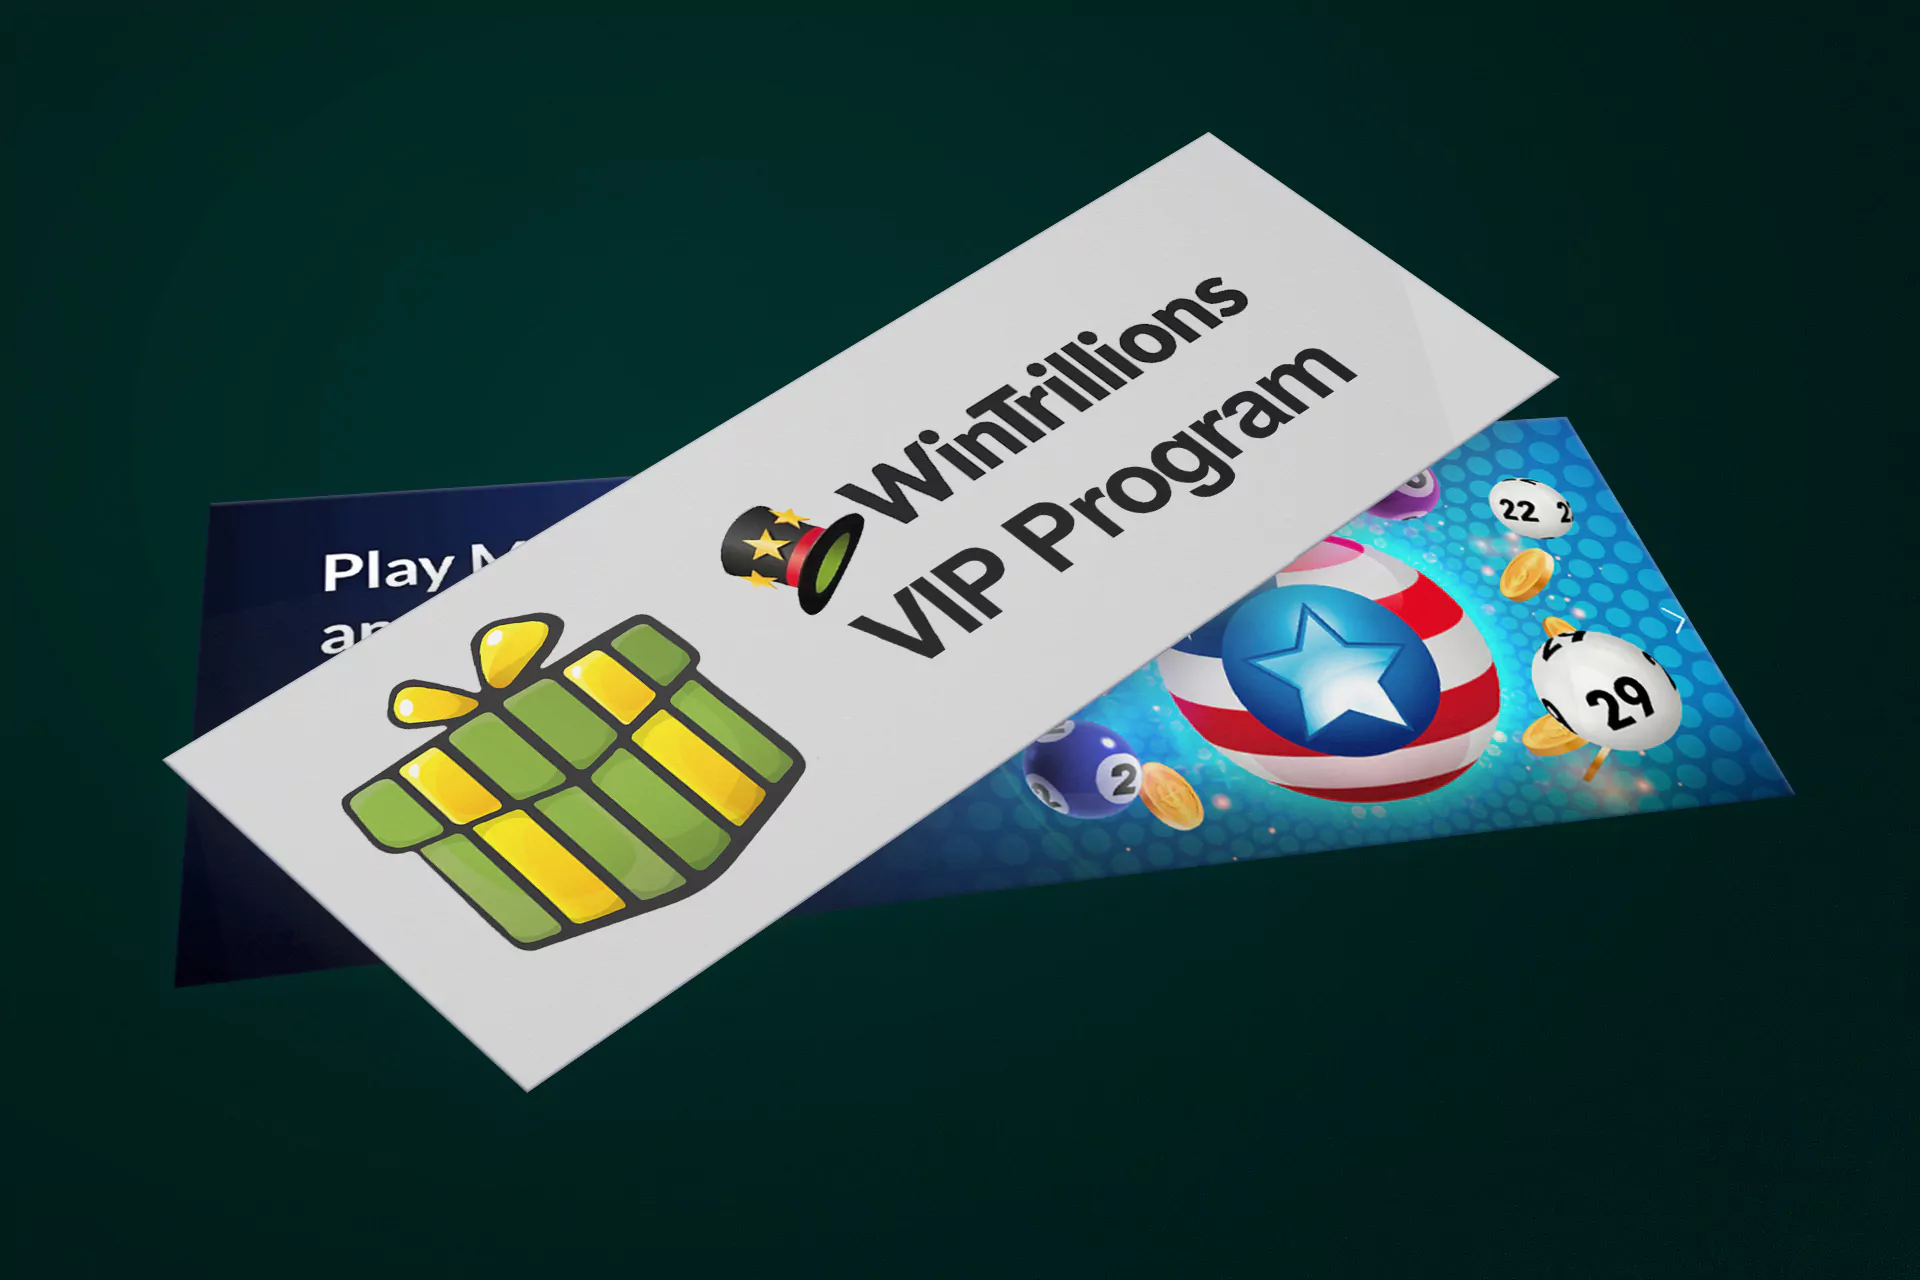 Users can claim bonuses and take part in actual promotion programs.